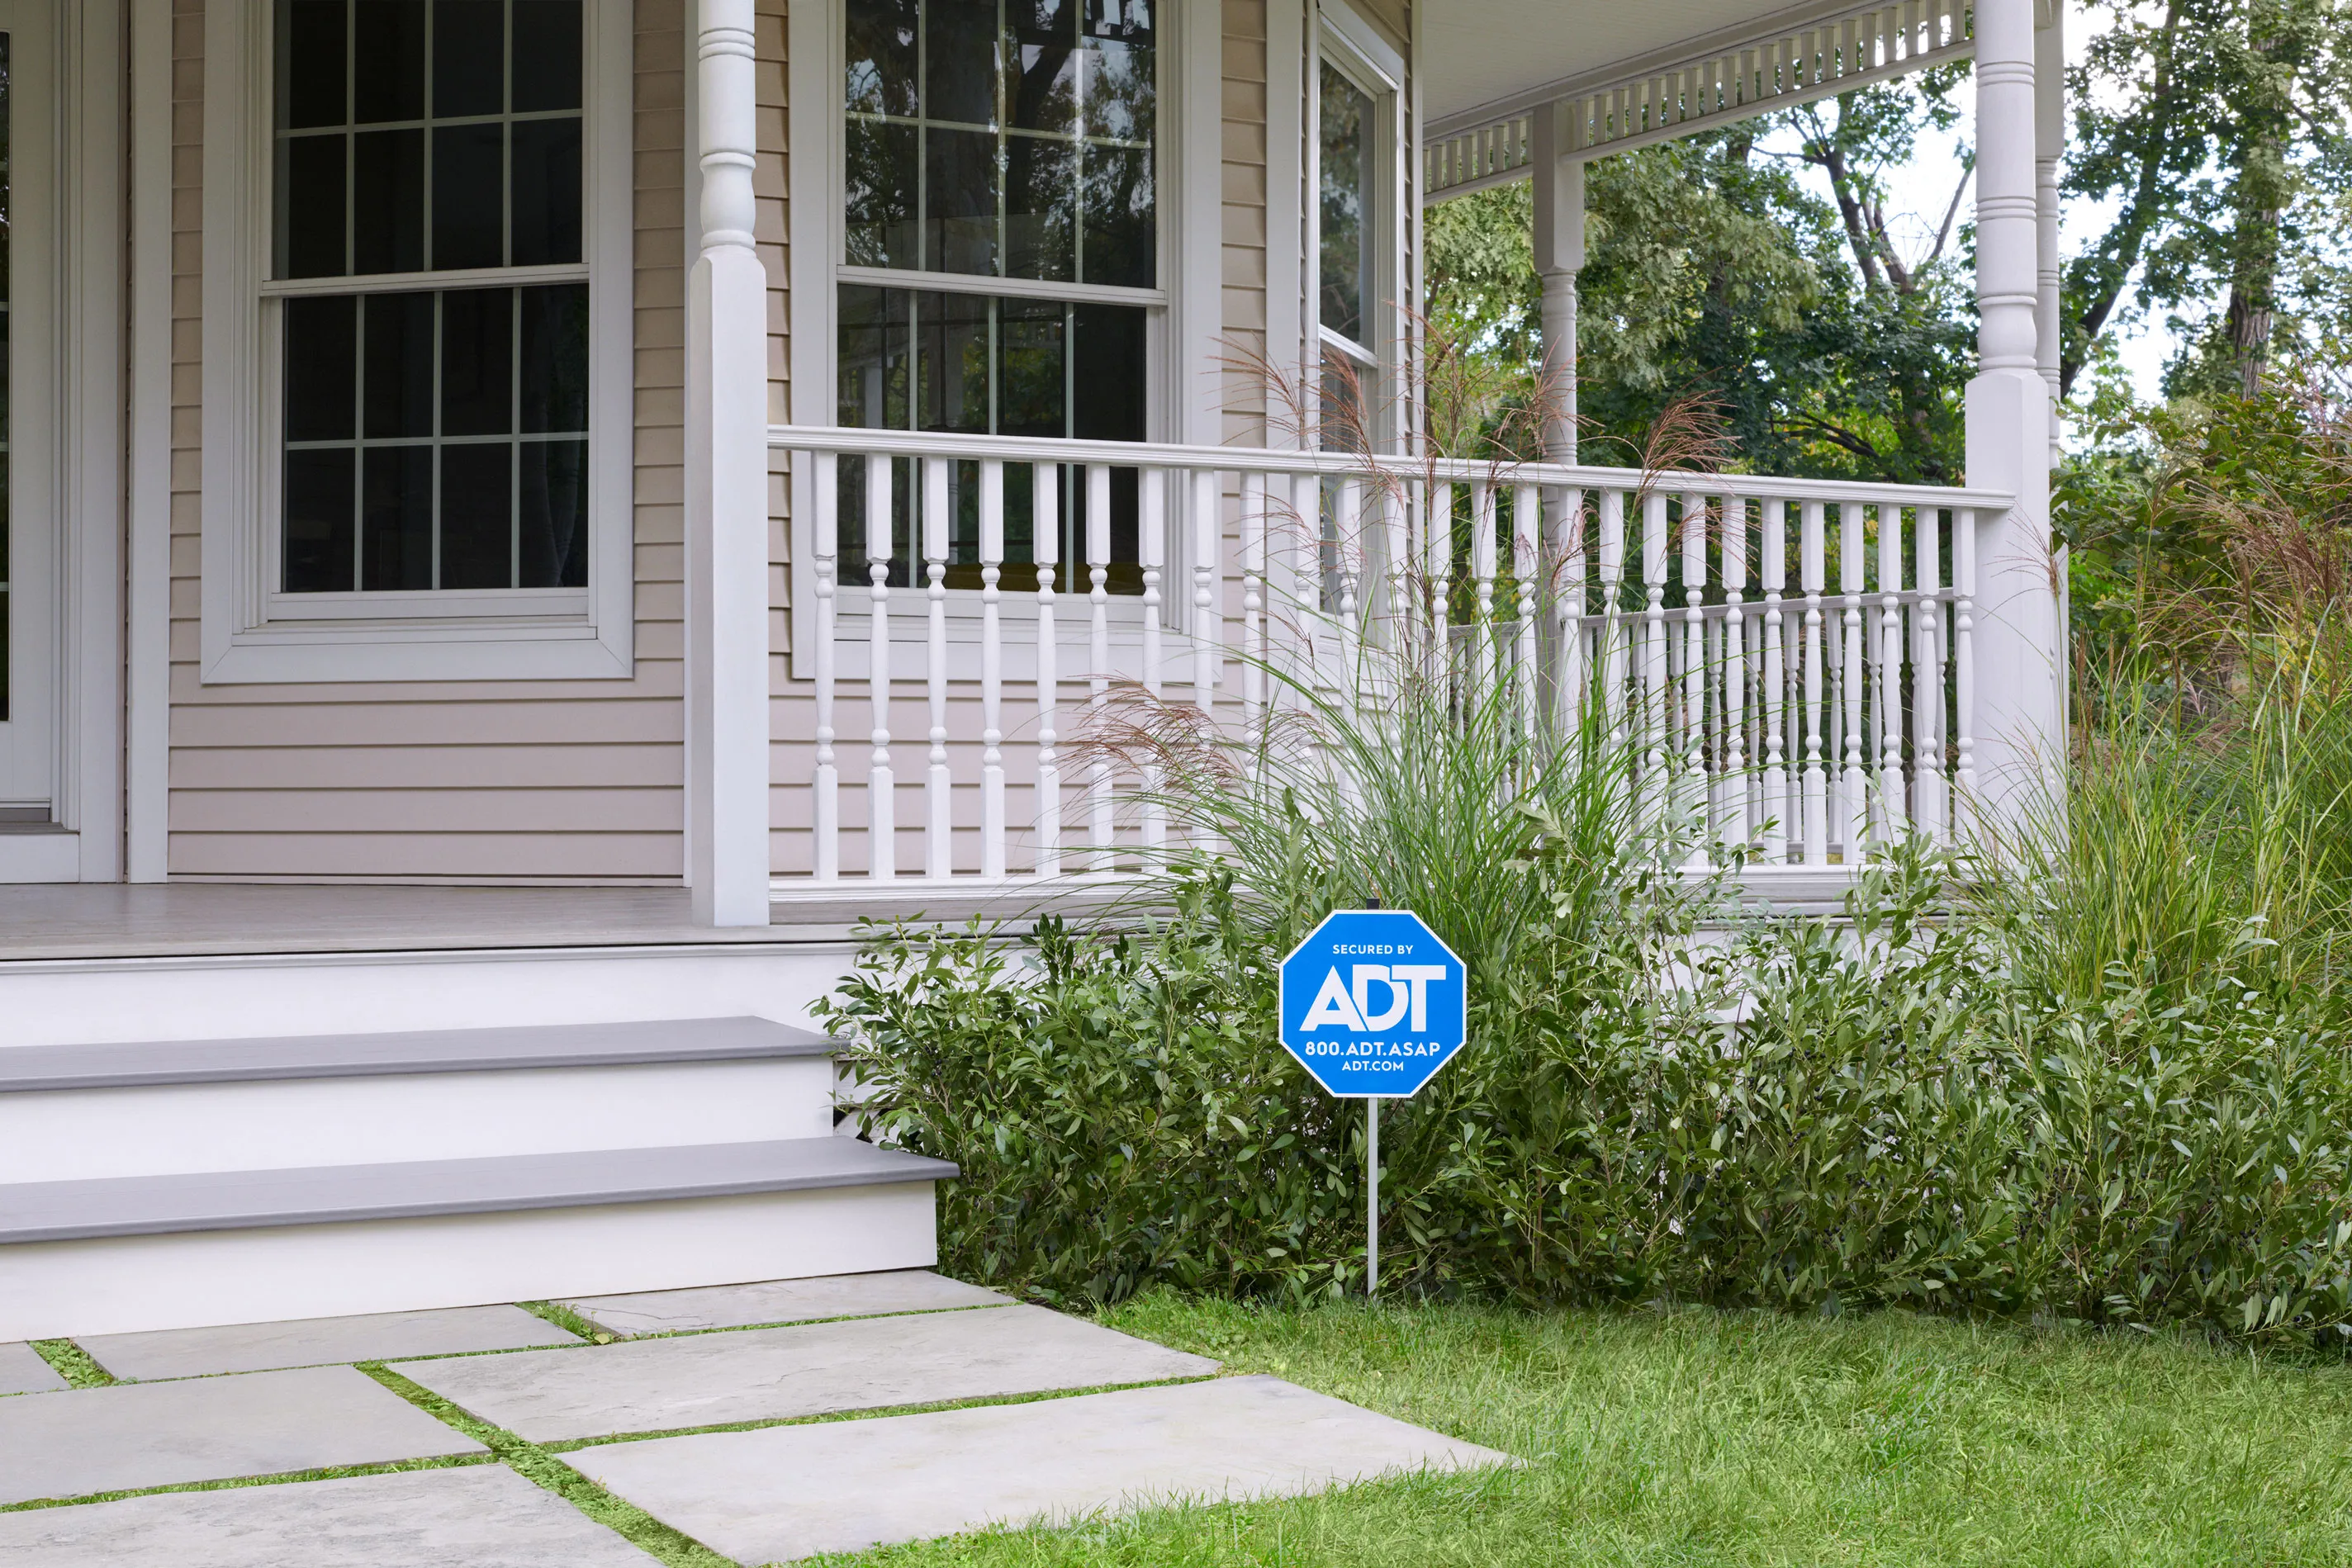 How Does ADT Work?